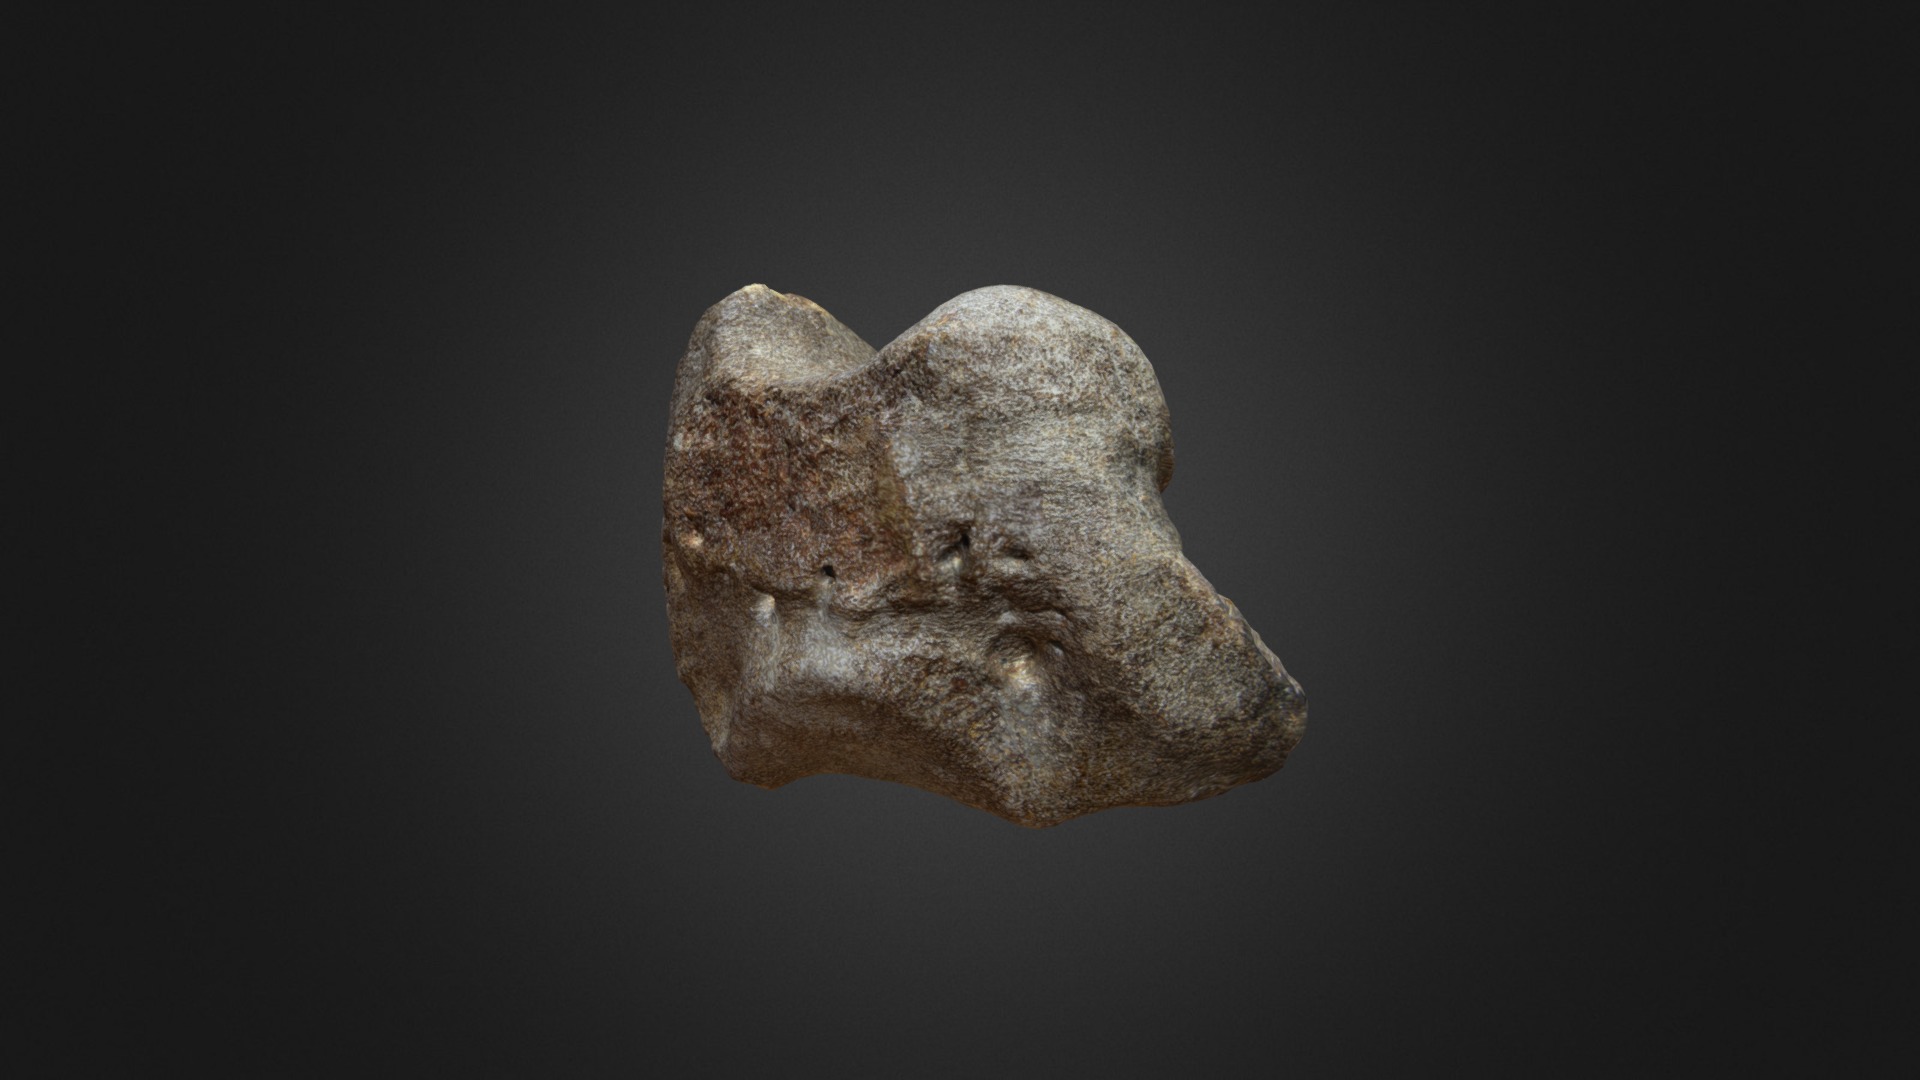 3D model Woolly Rhino Wristbone - This is a 3D model of the Woolly Rhino Wristbone. The 3D model is about a stone with a dark background.